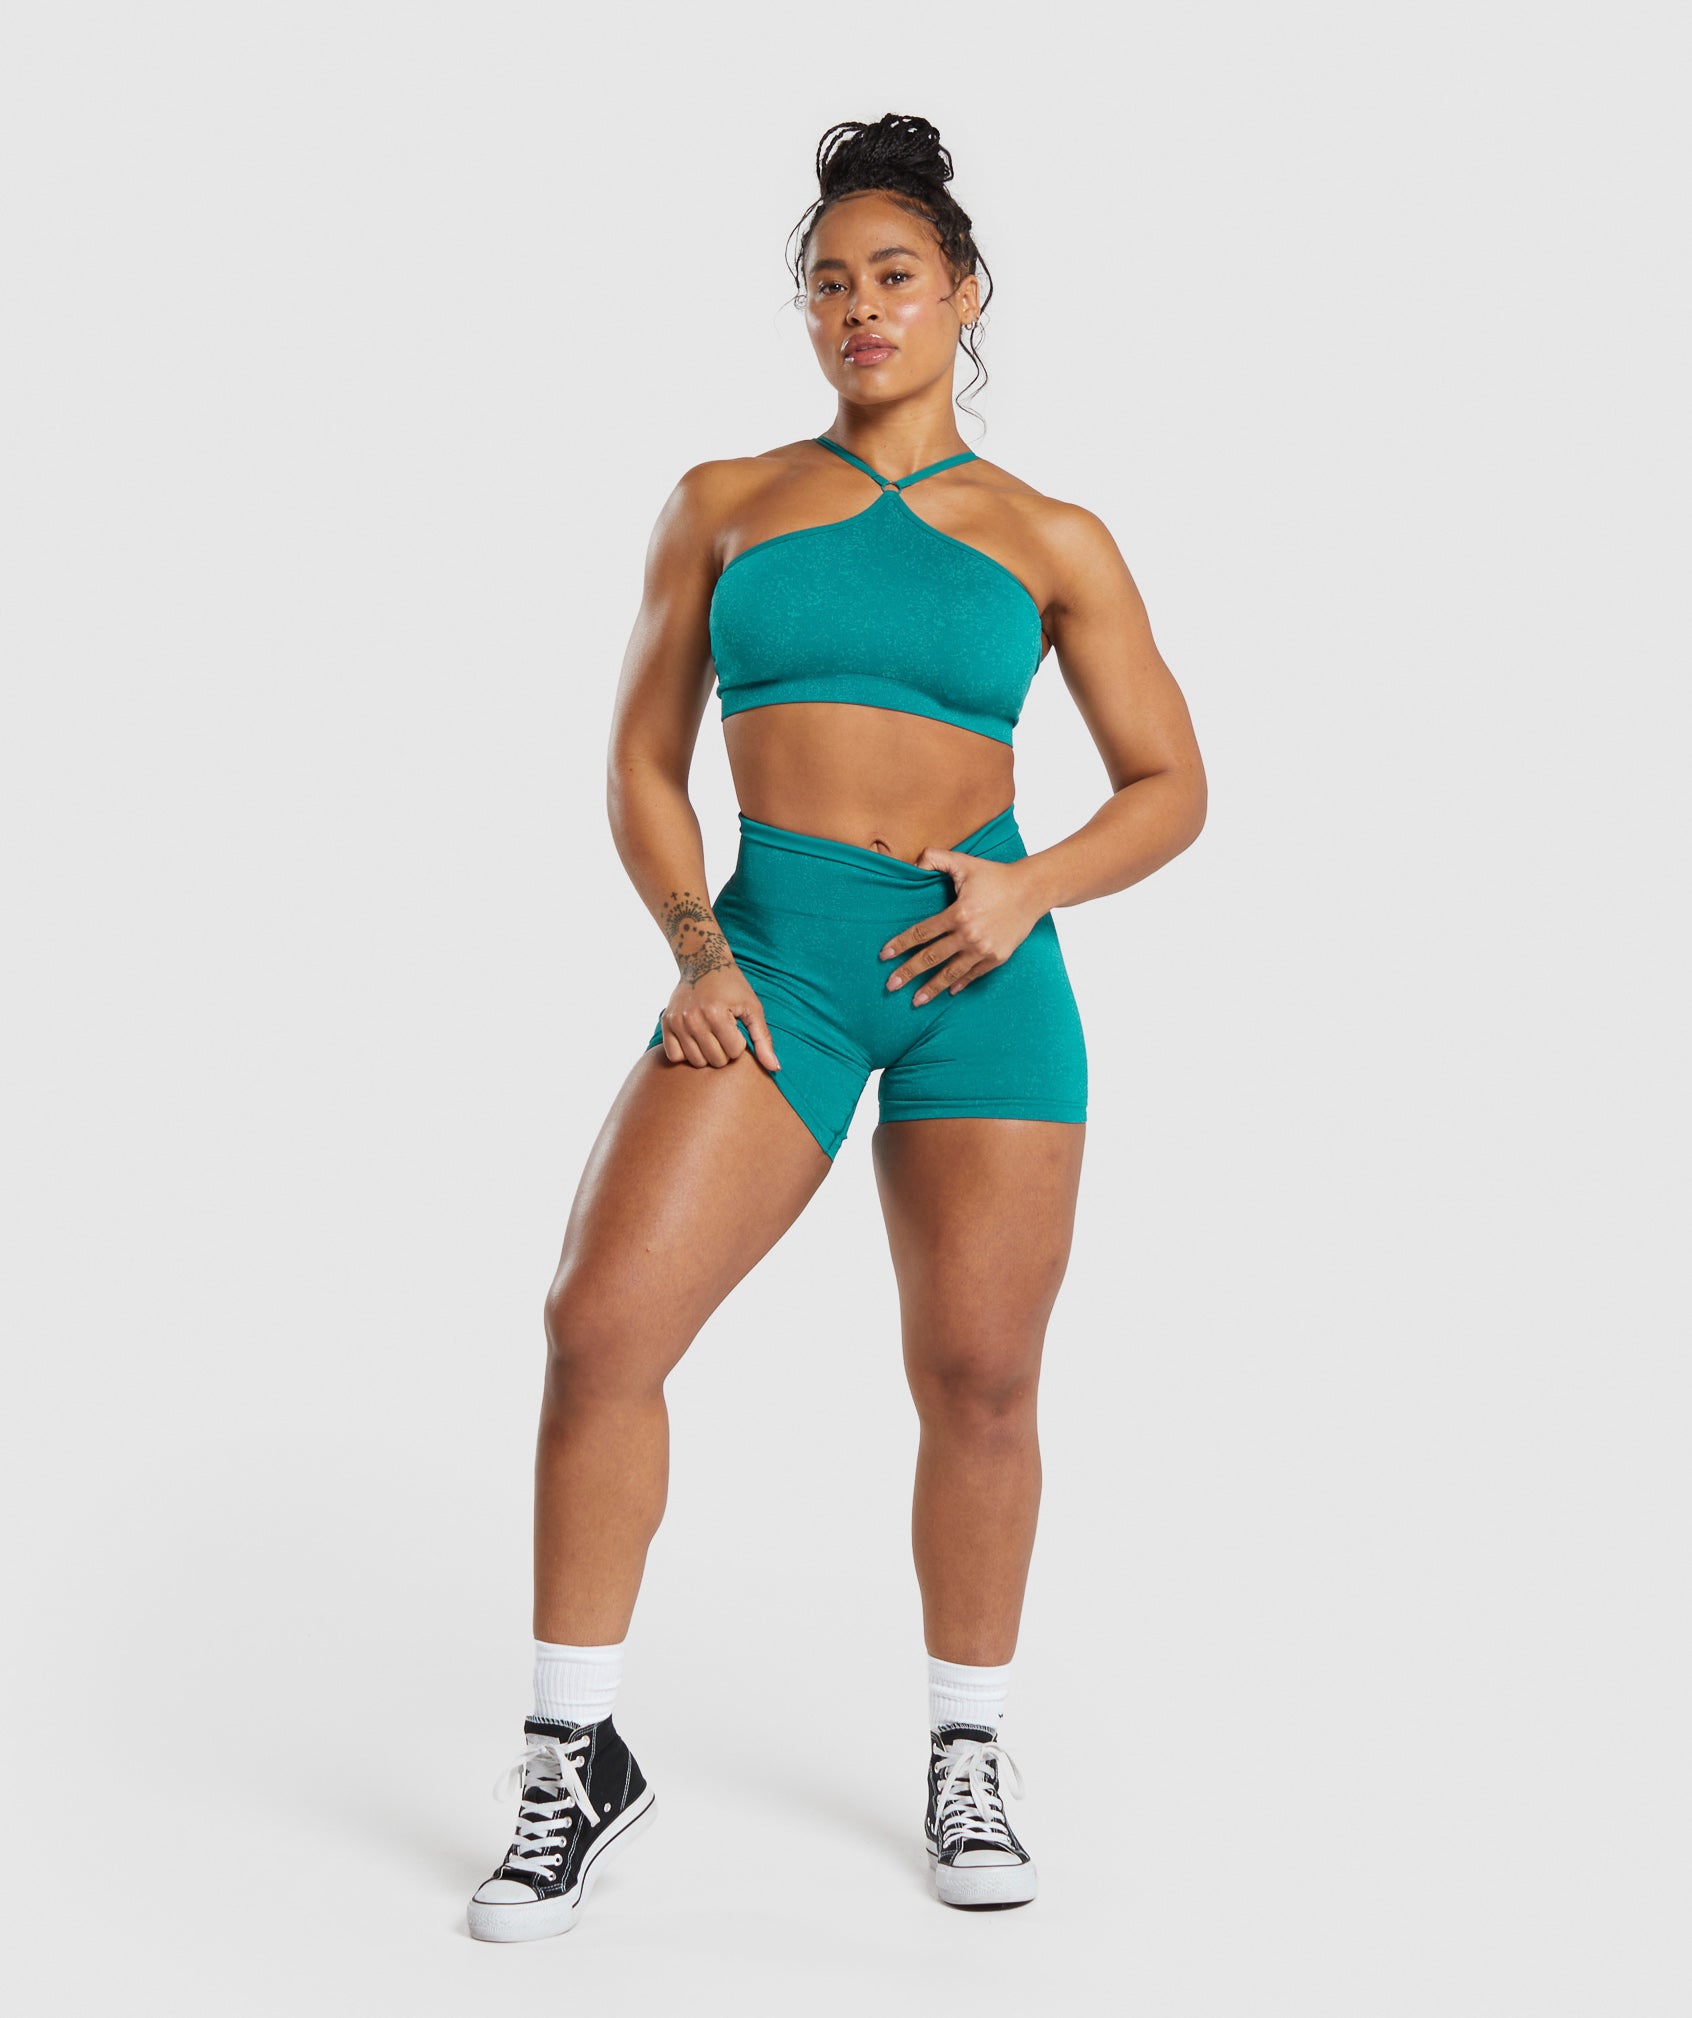 Adapt Fleck Seamless Shorts in Ocean Teal/Artificial Teal - view 4